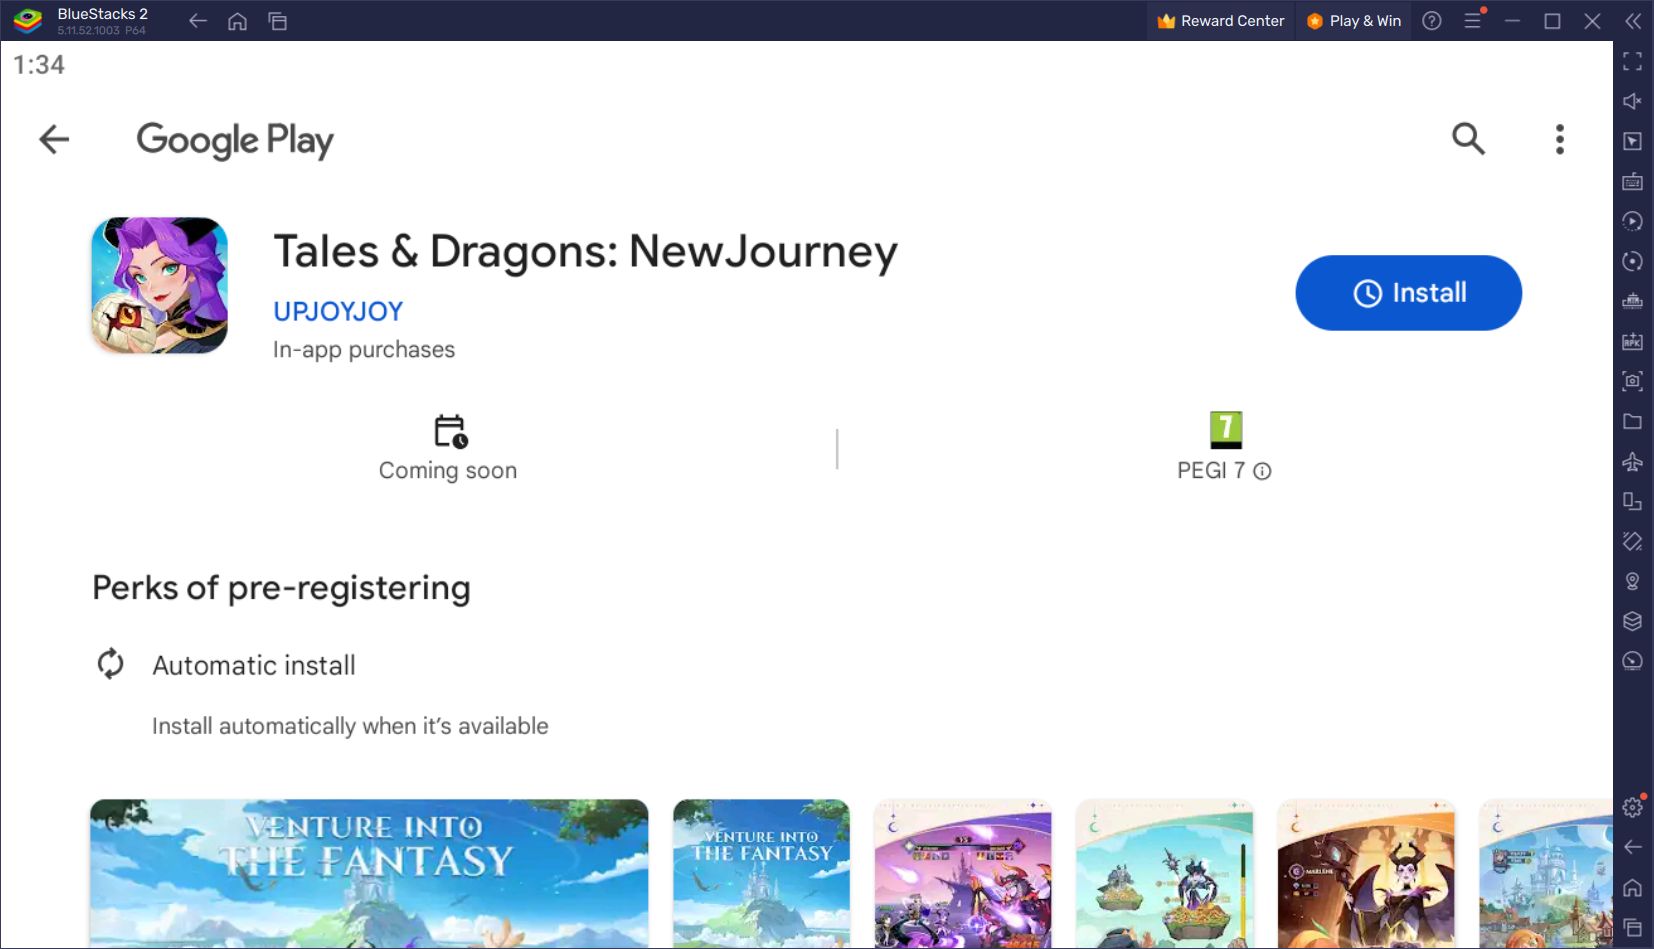 Play Tales & Dragons: New Journey with BlueStacks, Start a New Adventure on PC